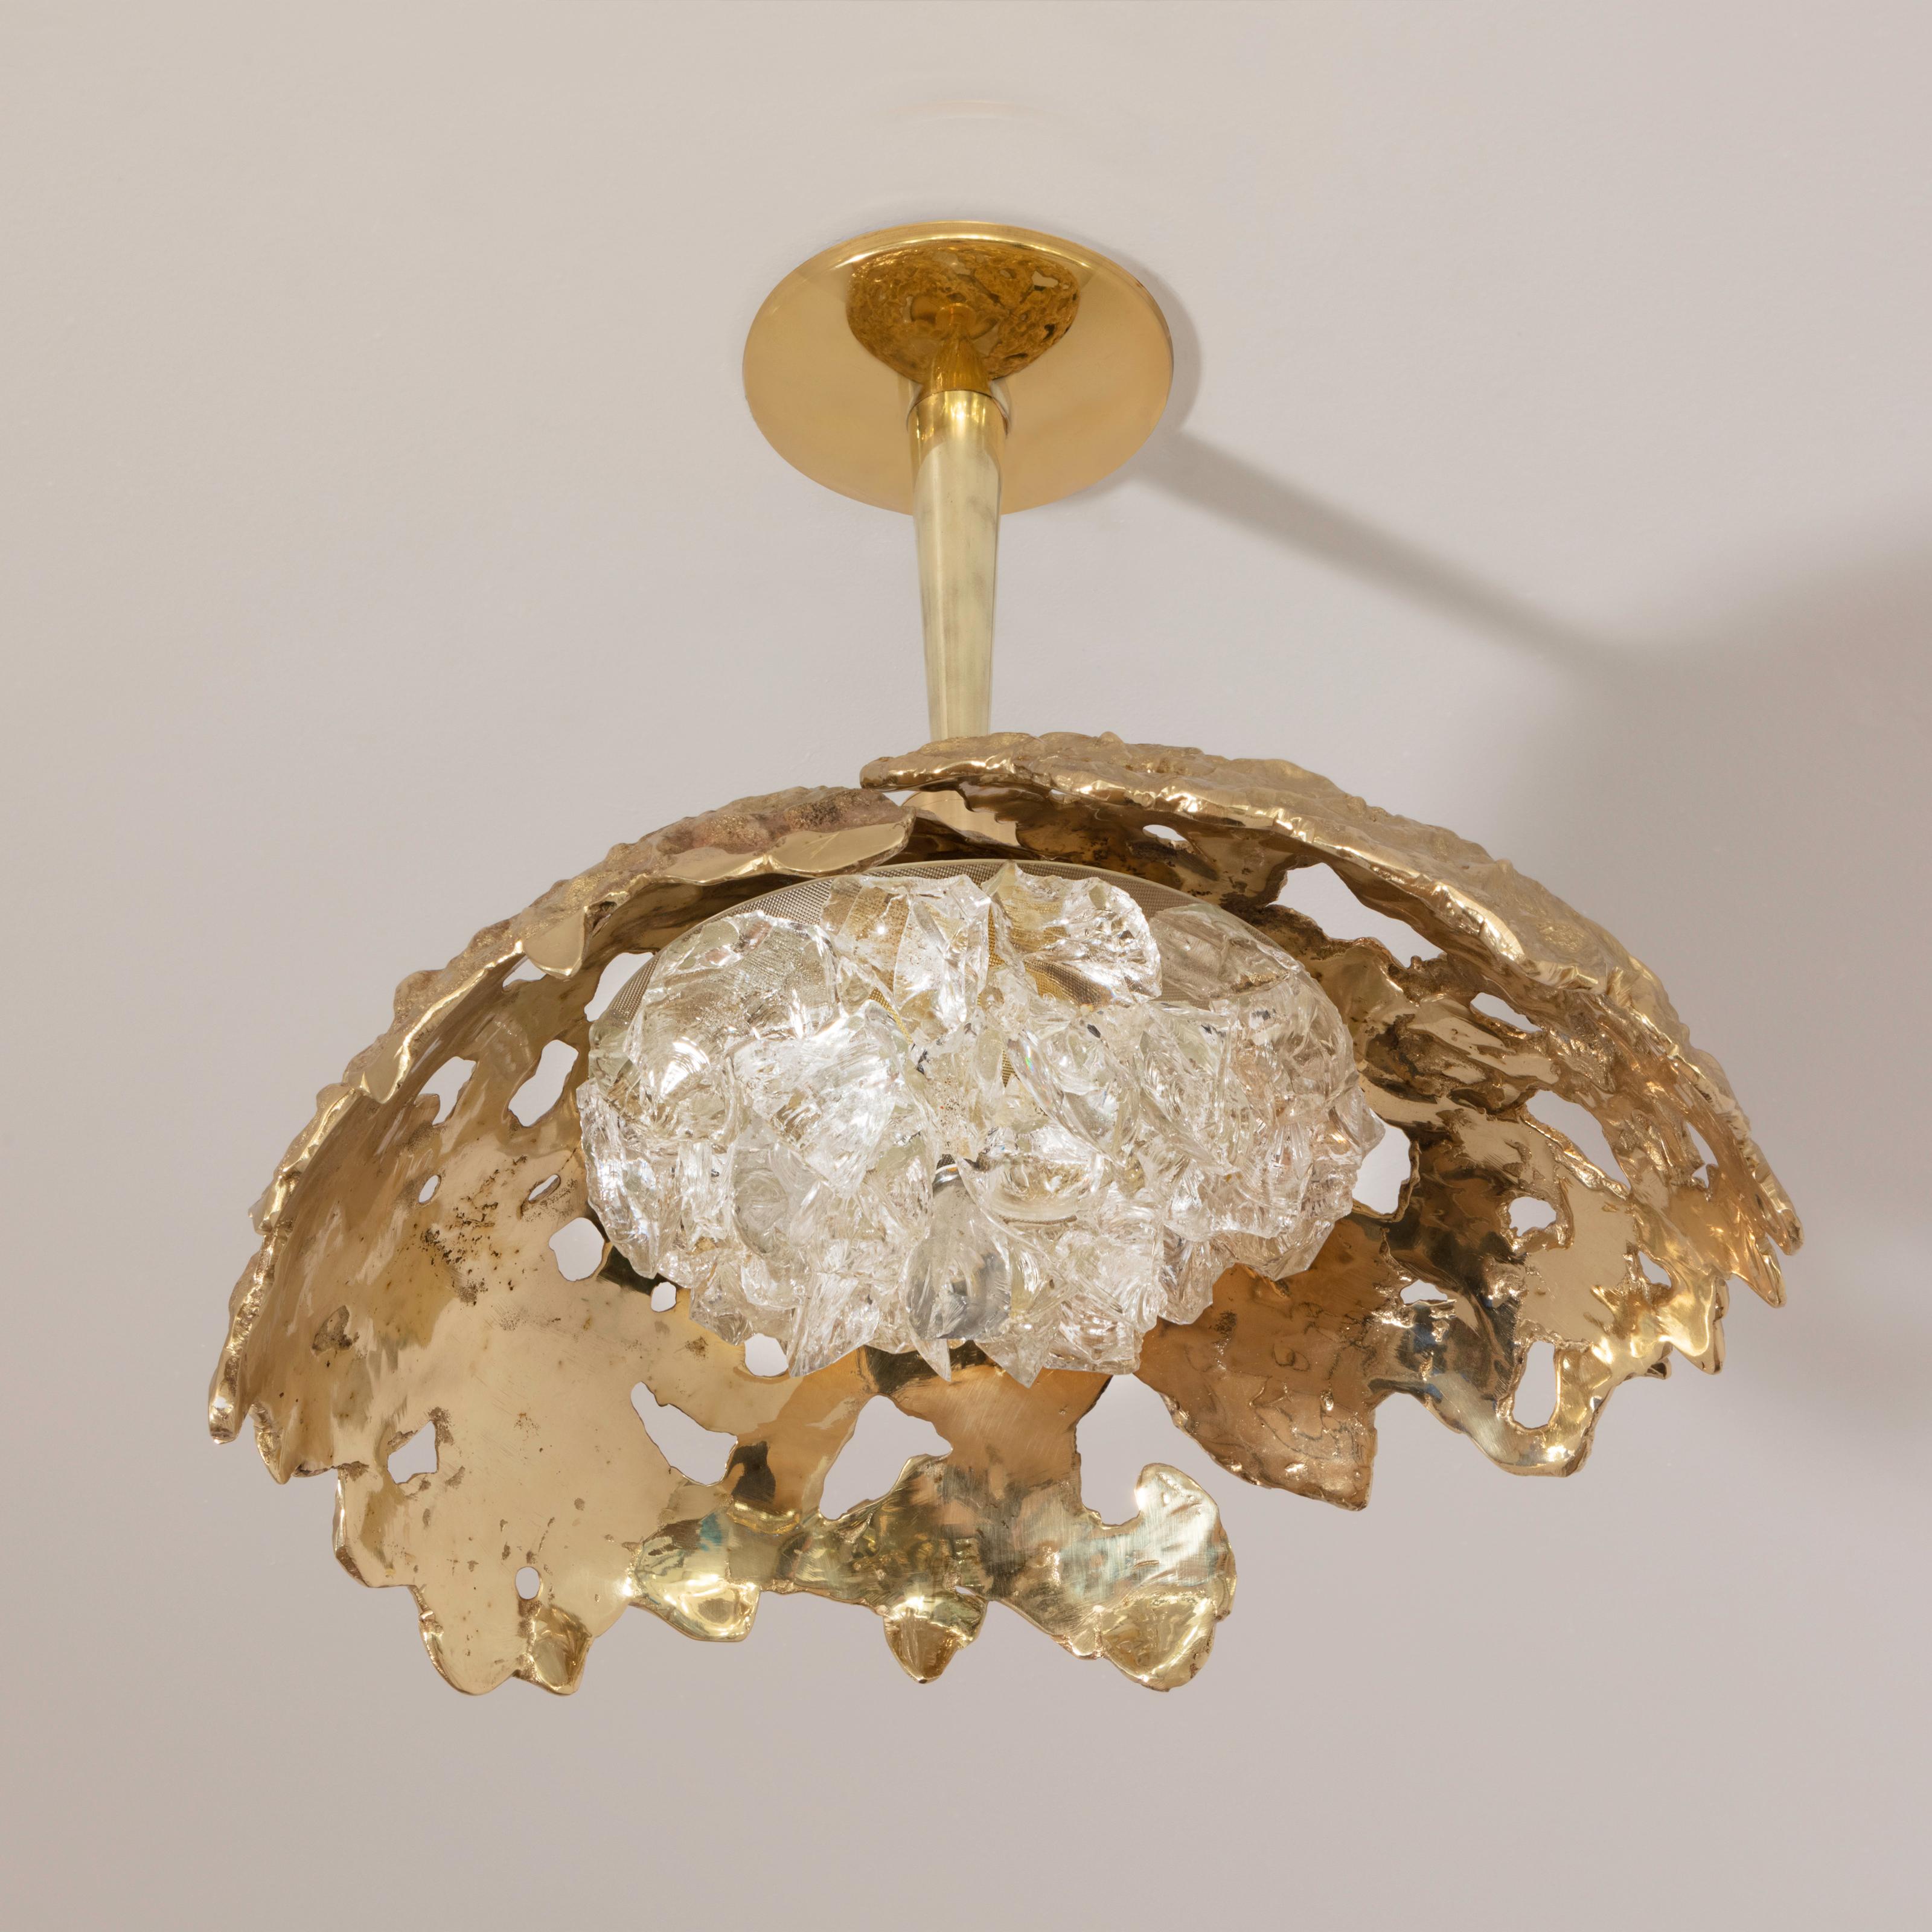 Blending sculpture and design, the N.15 is the intermediate fixture of the Etna series with a glass shade composed of dozens of crystal elements. The organic cast brass shell culminates in a polished stem and canopy. Shown in polished brass with